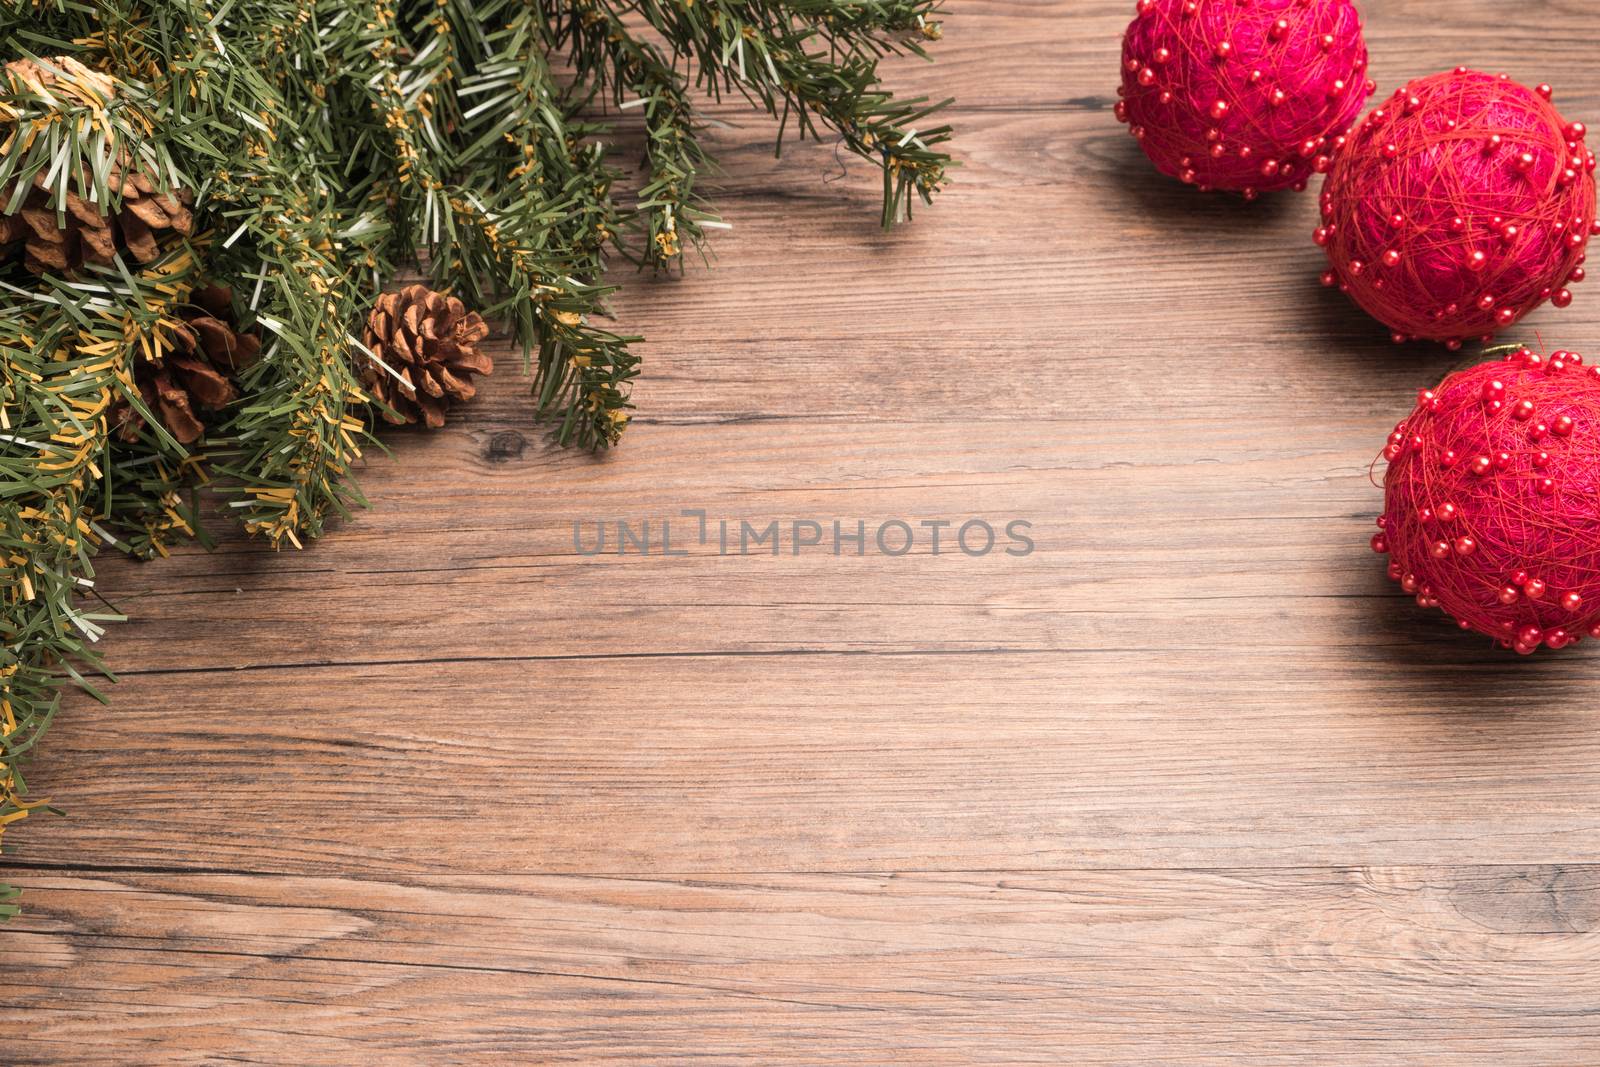 Christmas border design with pine cone, fir branches and christmas balls over old oak wood